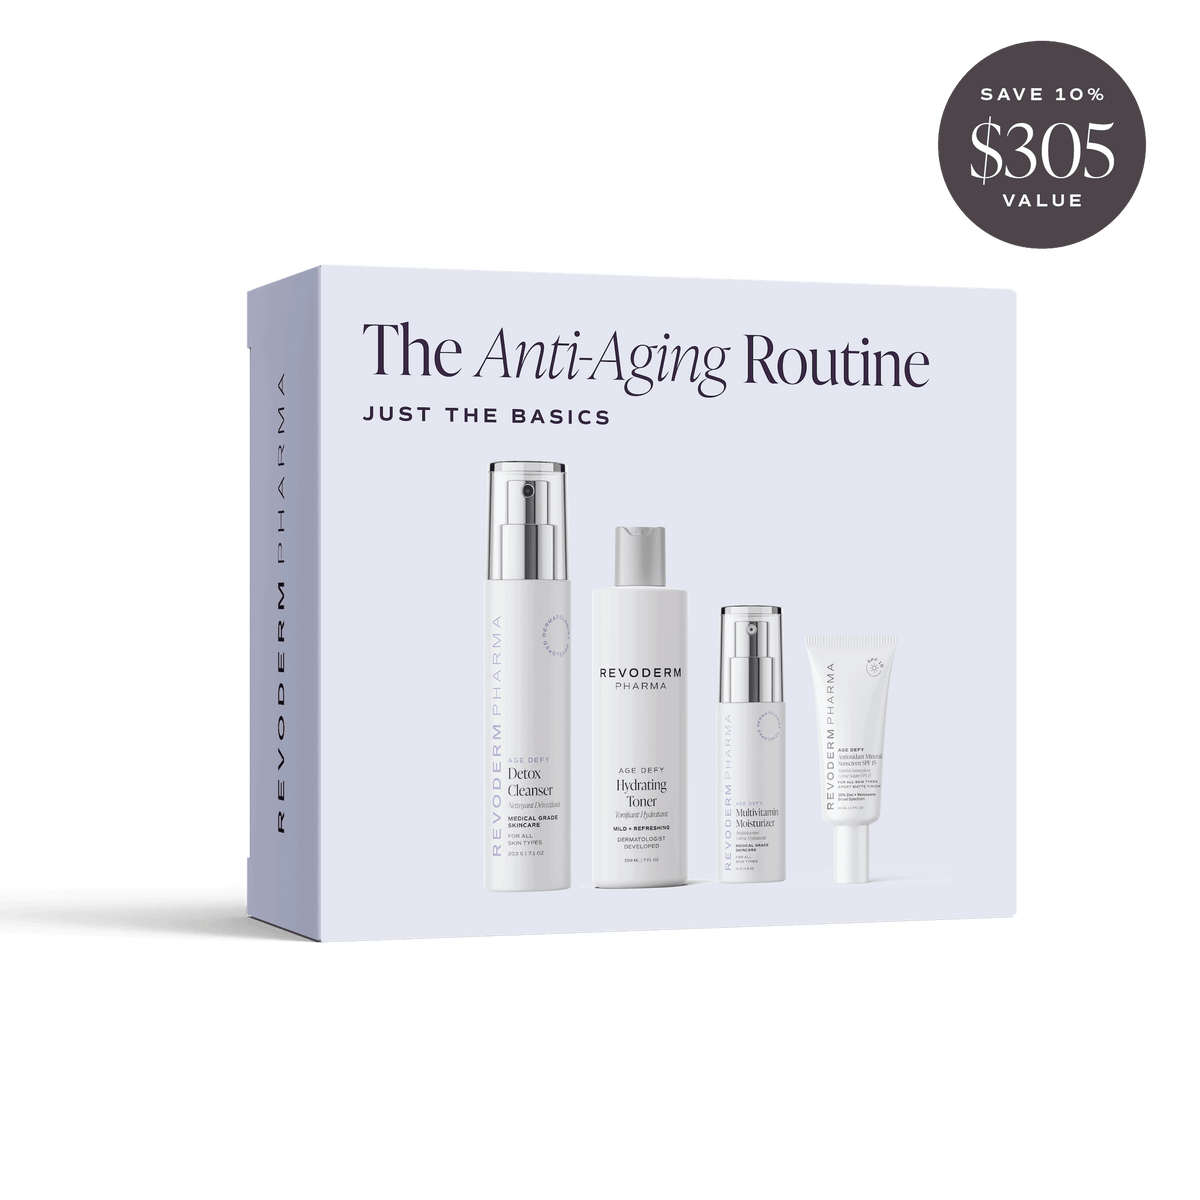 Just the Basics Routine: Anti-Aging